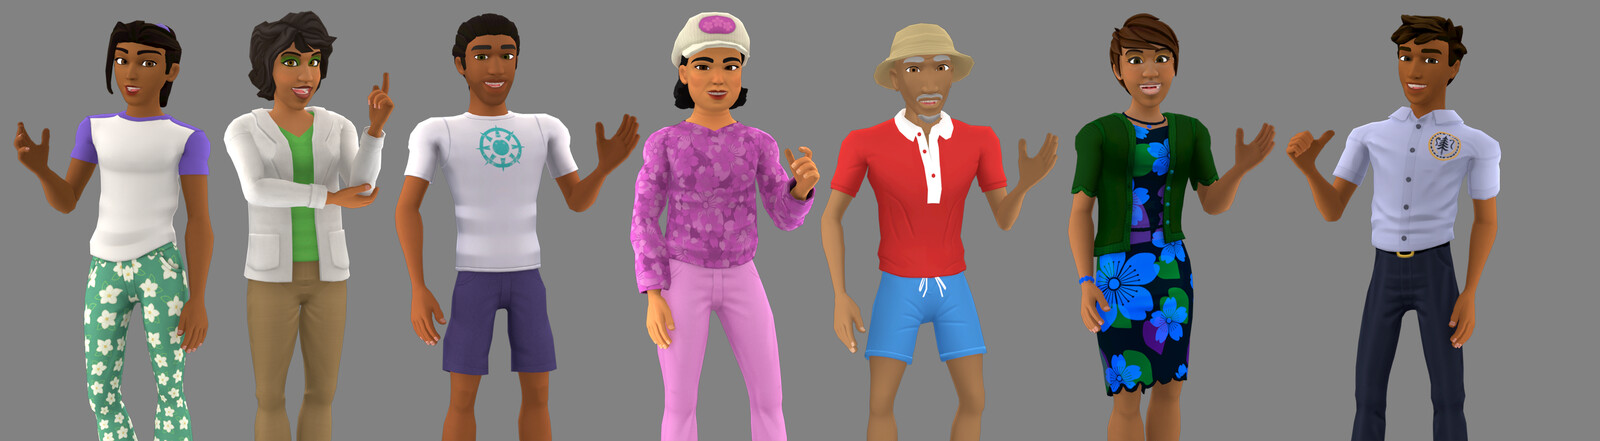 Here is the cast of NPC characters for one of our games made using this system.